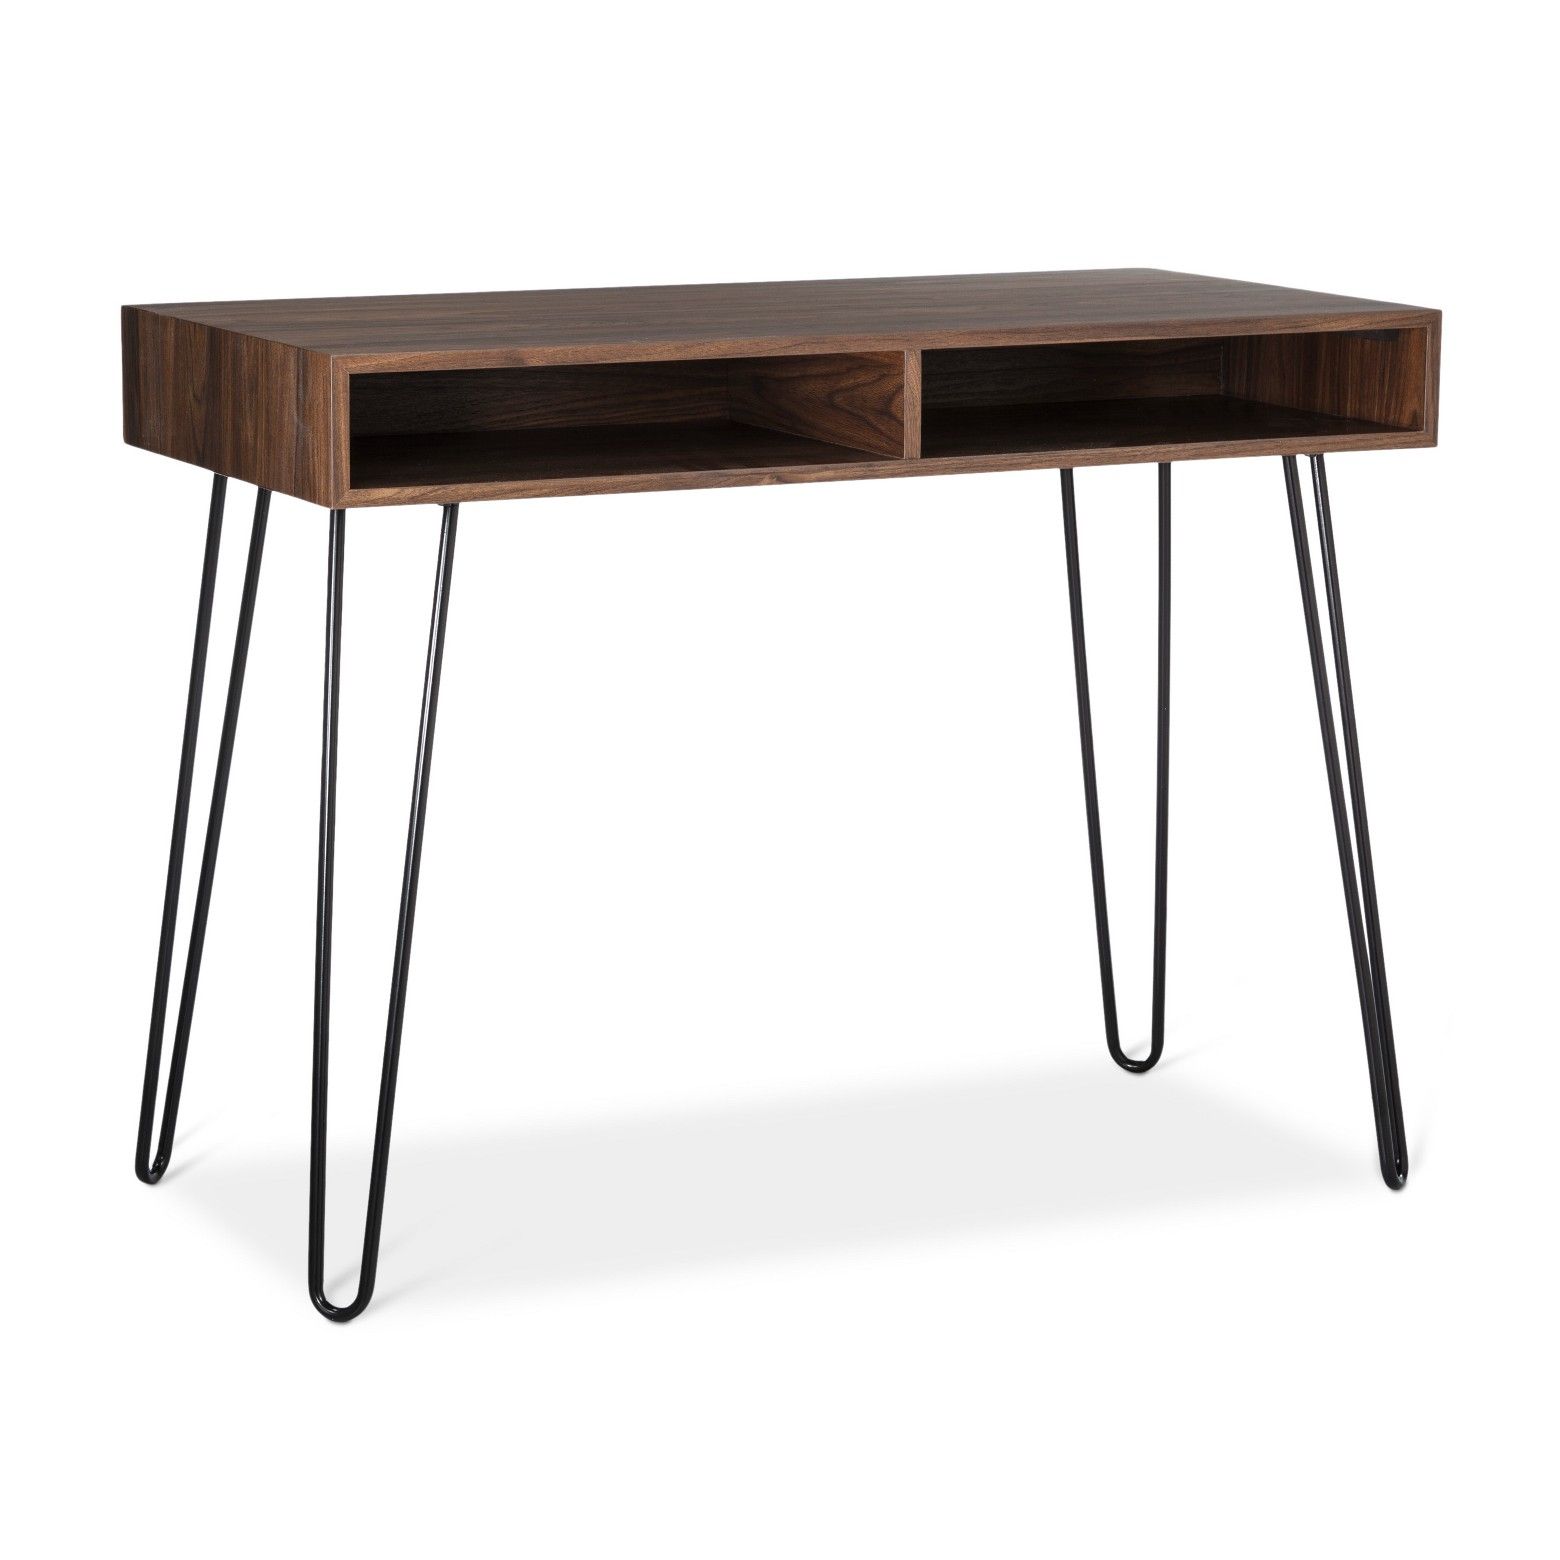 two cubbies provide storage the hairpin desk walnut from room essentials accent table this wood and metal has simple look that can fit discreetly pottery barn side with lamp